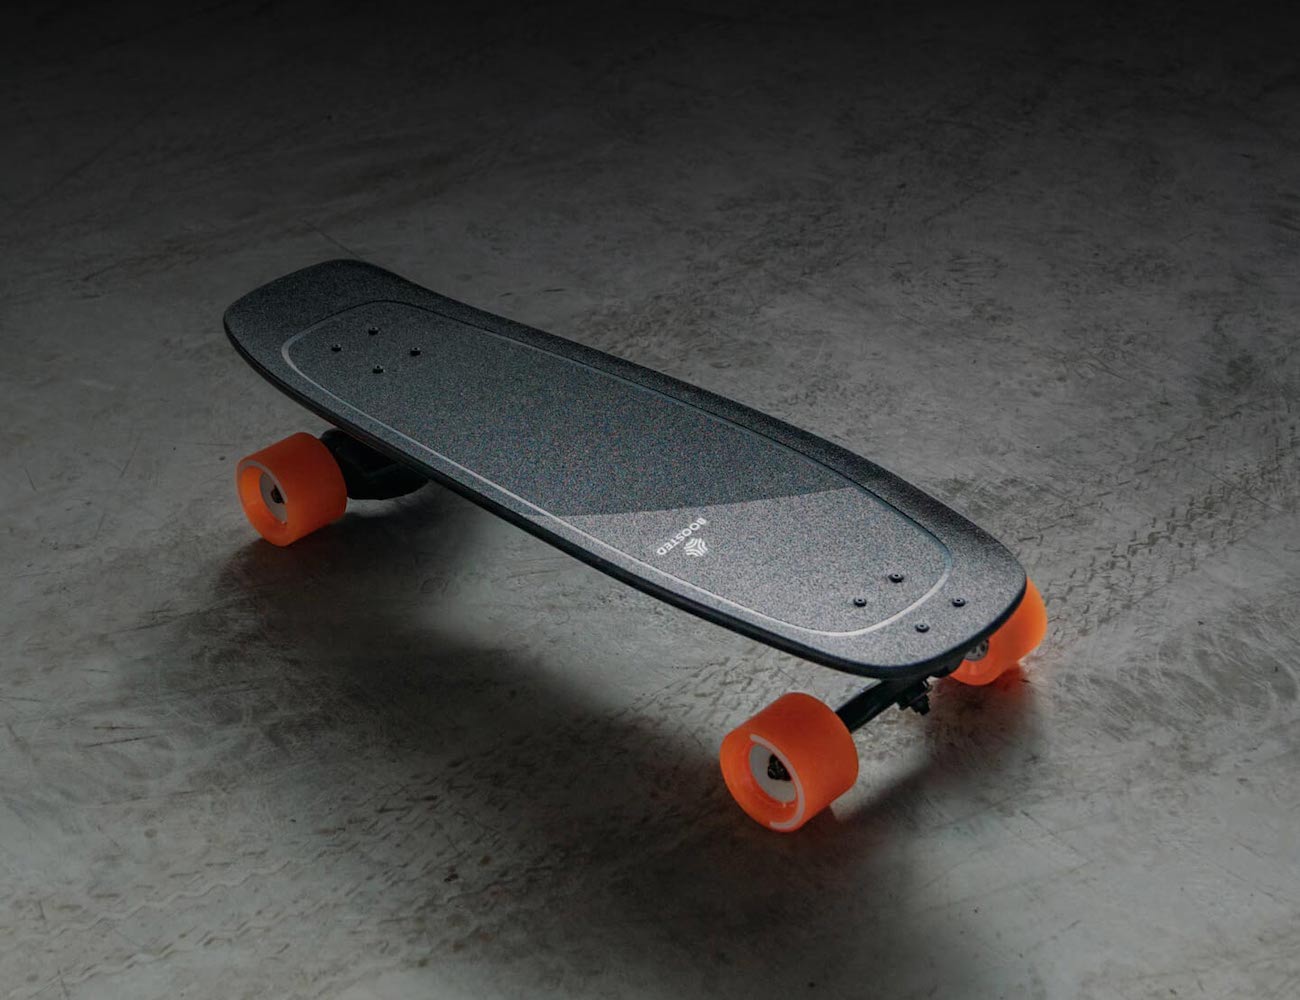  The Perfect Office - Boosted Boards Mini, ITR One Advanced Modular Backpack and more